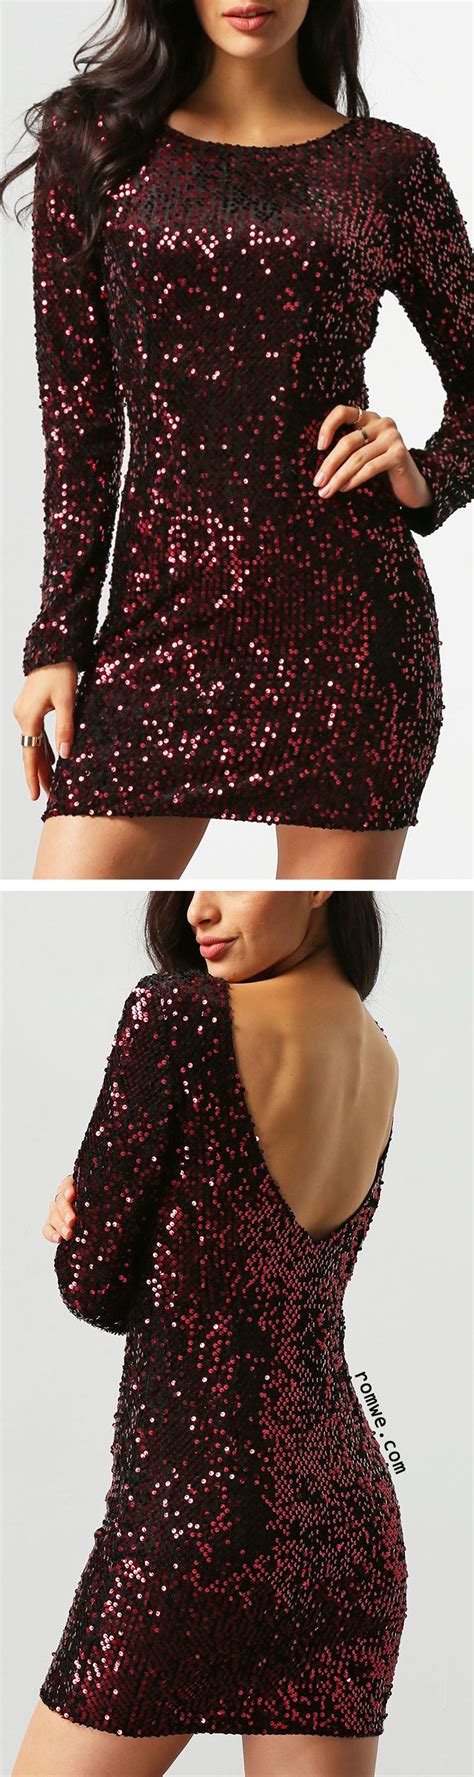 Wine Red Long Sleeve Sequined Backless Dress Fancy Dresses Long